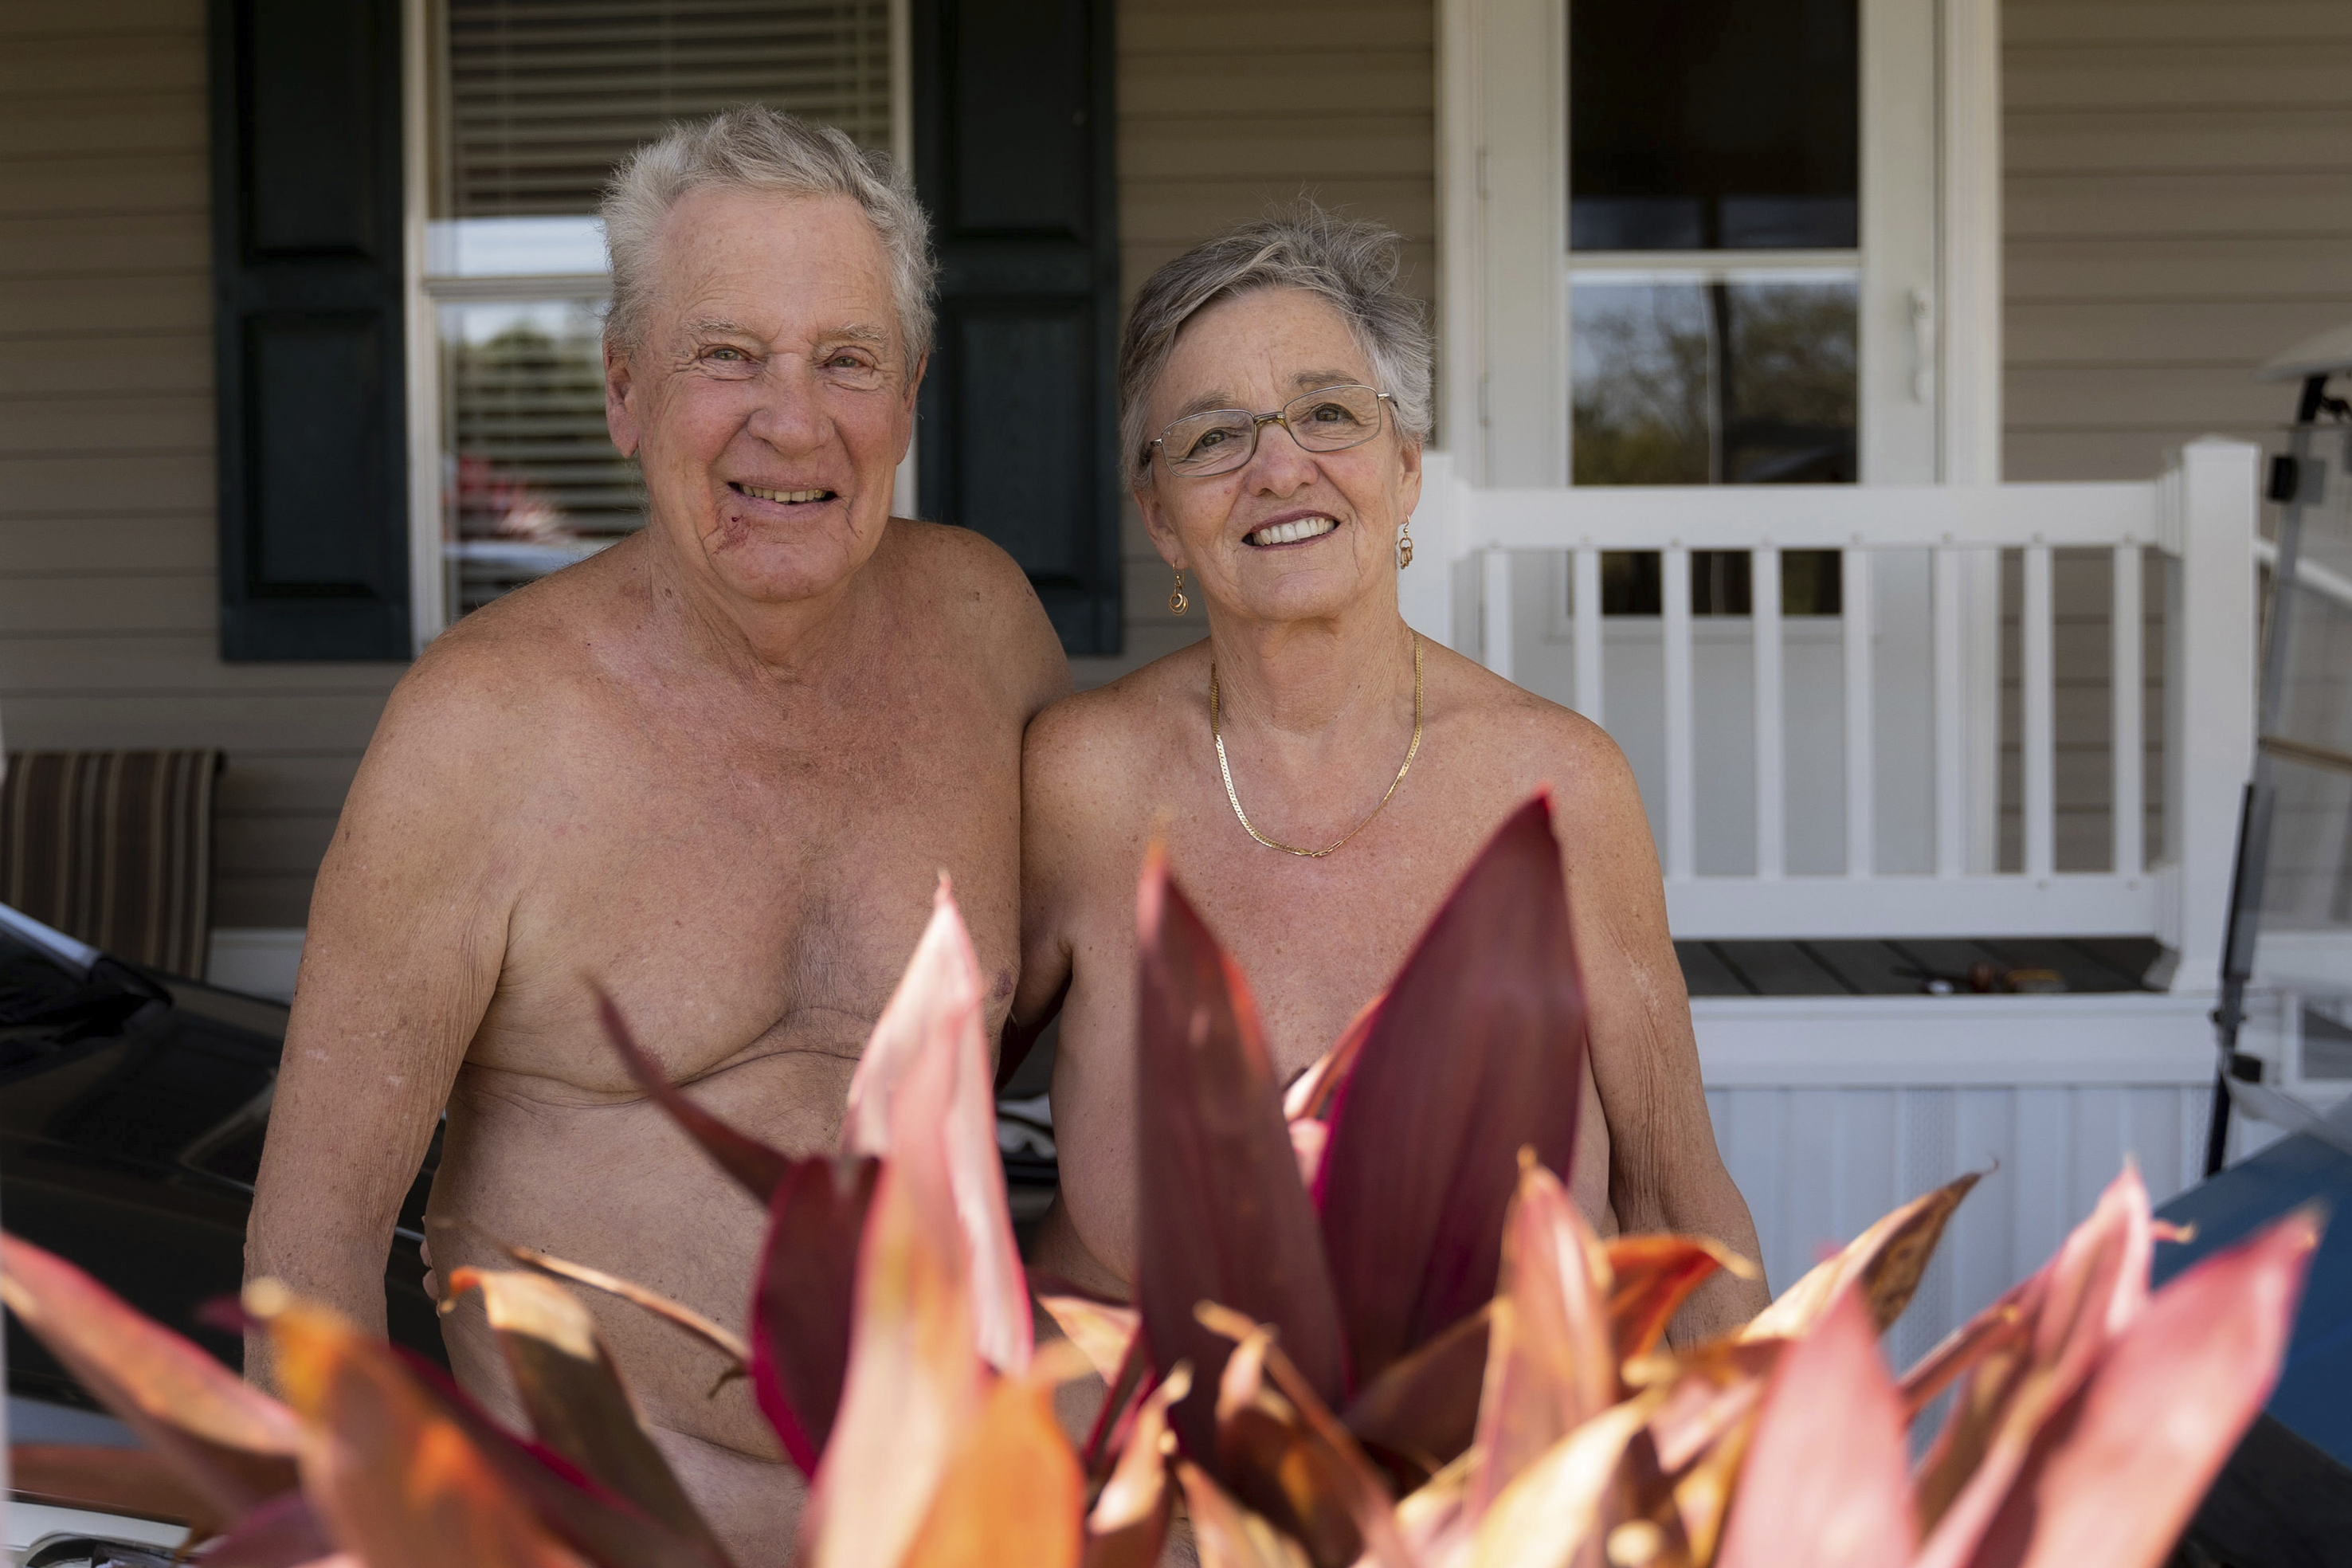 Inside a Christian Nudist Community in South Texas pic